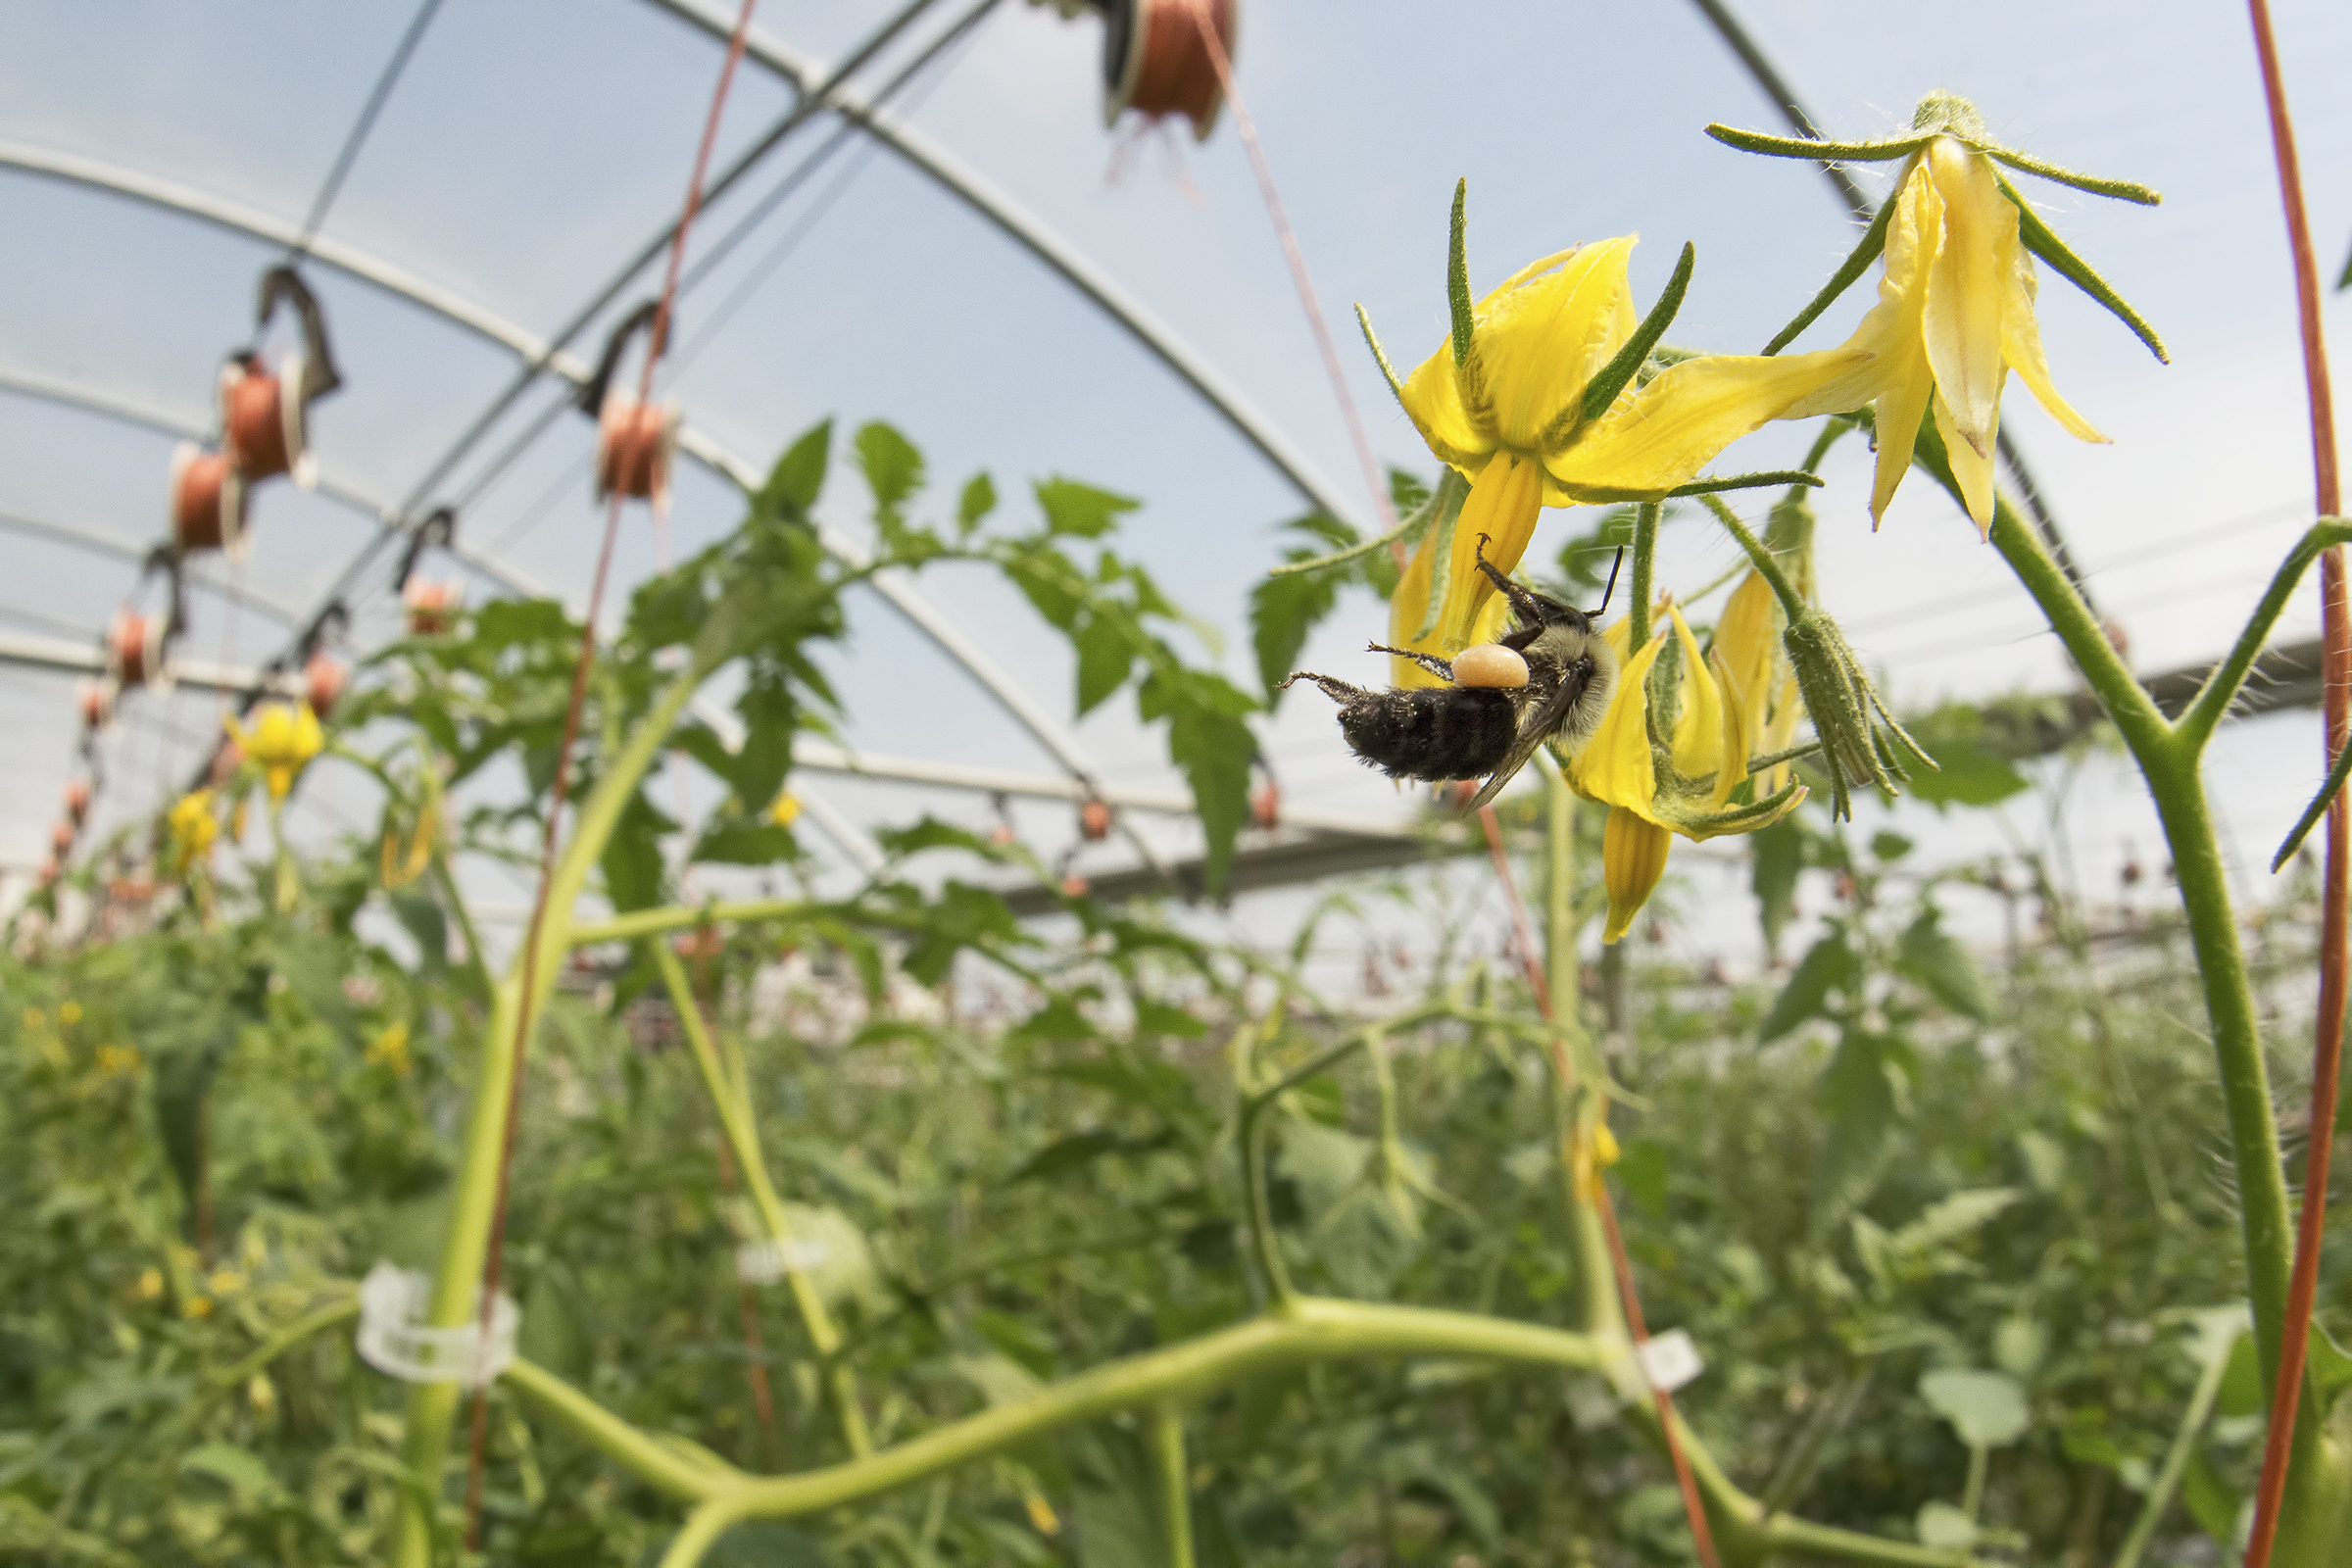 A bumble bee visiting a greenhouse tomato. (c) Clay Bolt